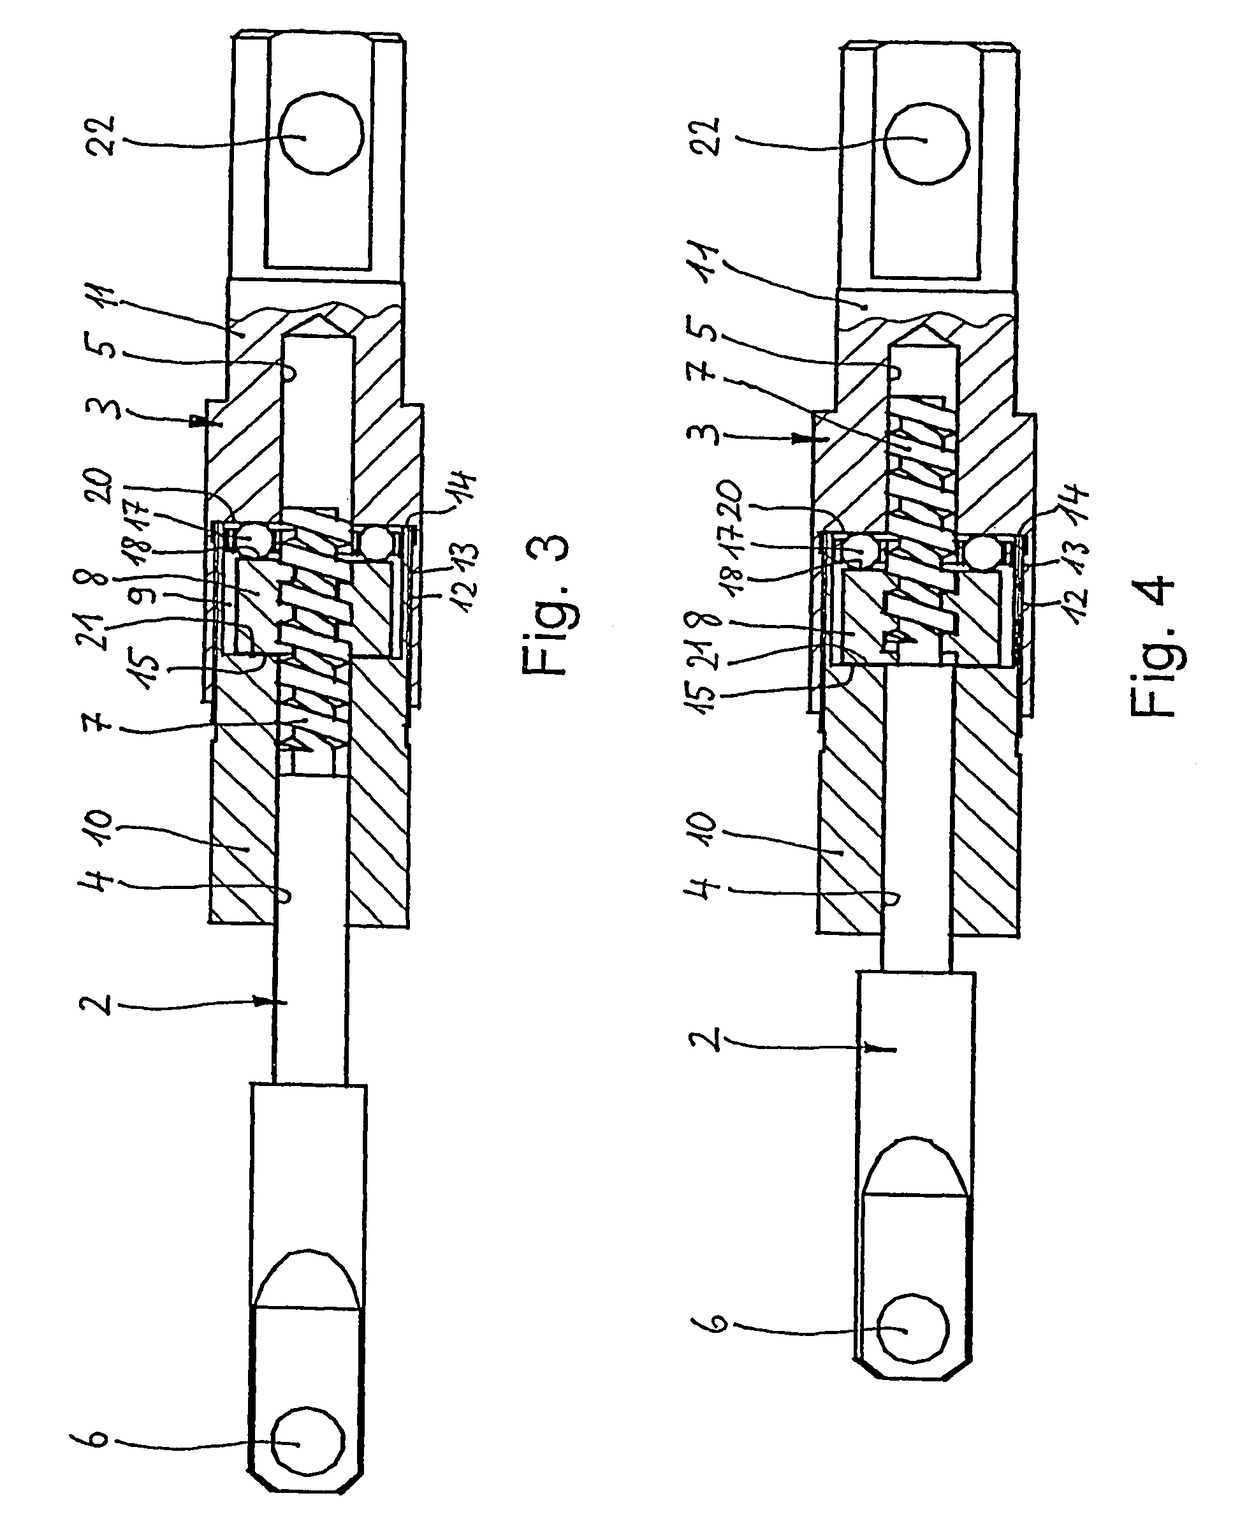 Longitudinally adjustable intermediate piece with a unidirectionally acting displacement blocking mechanism